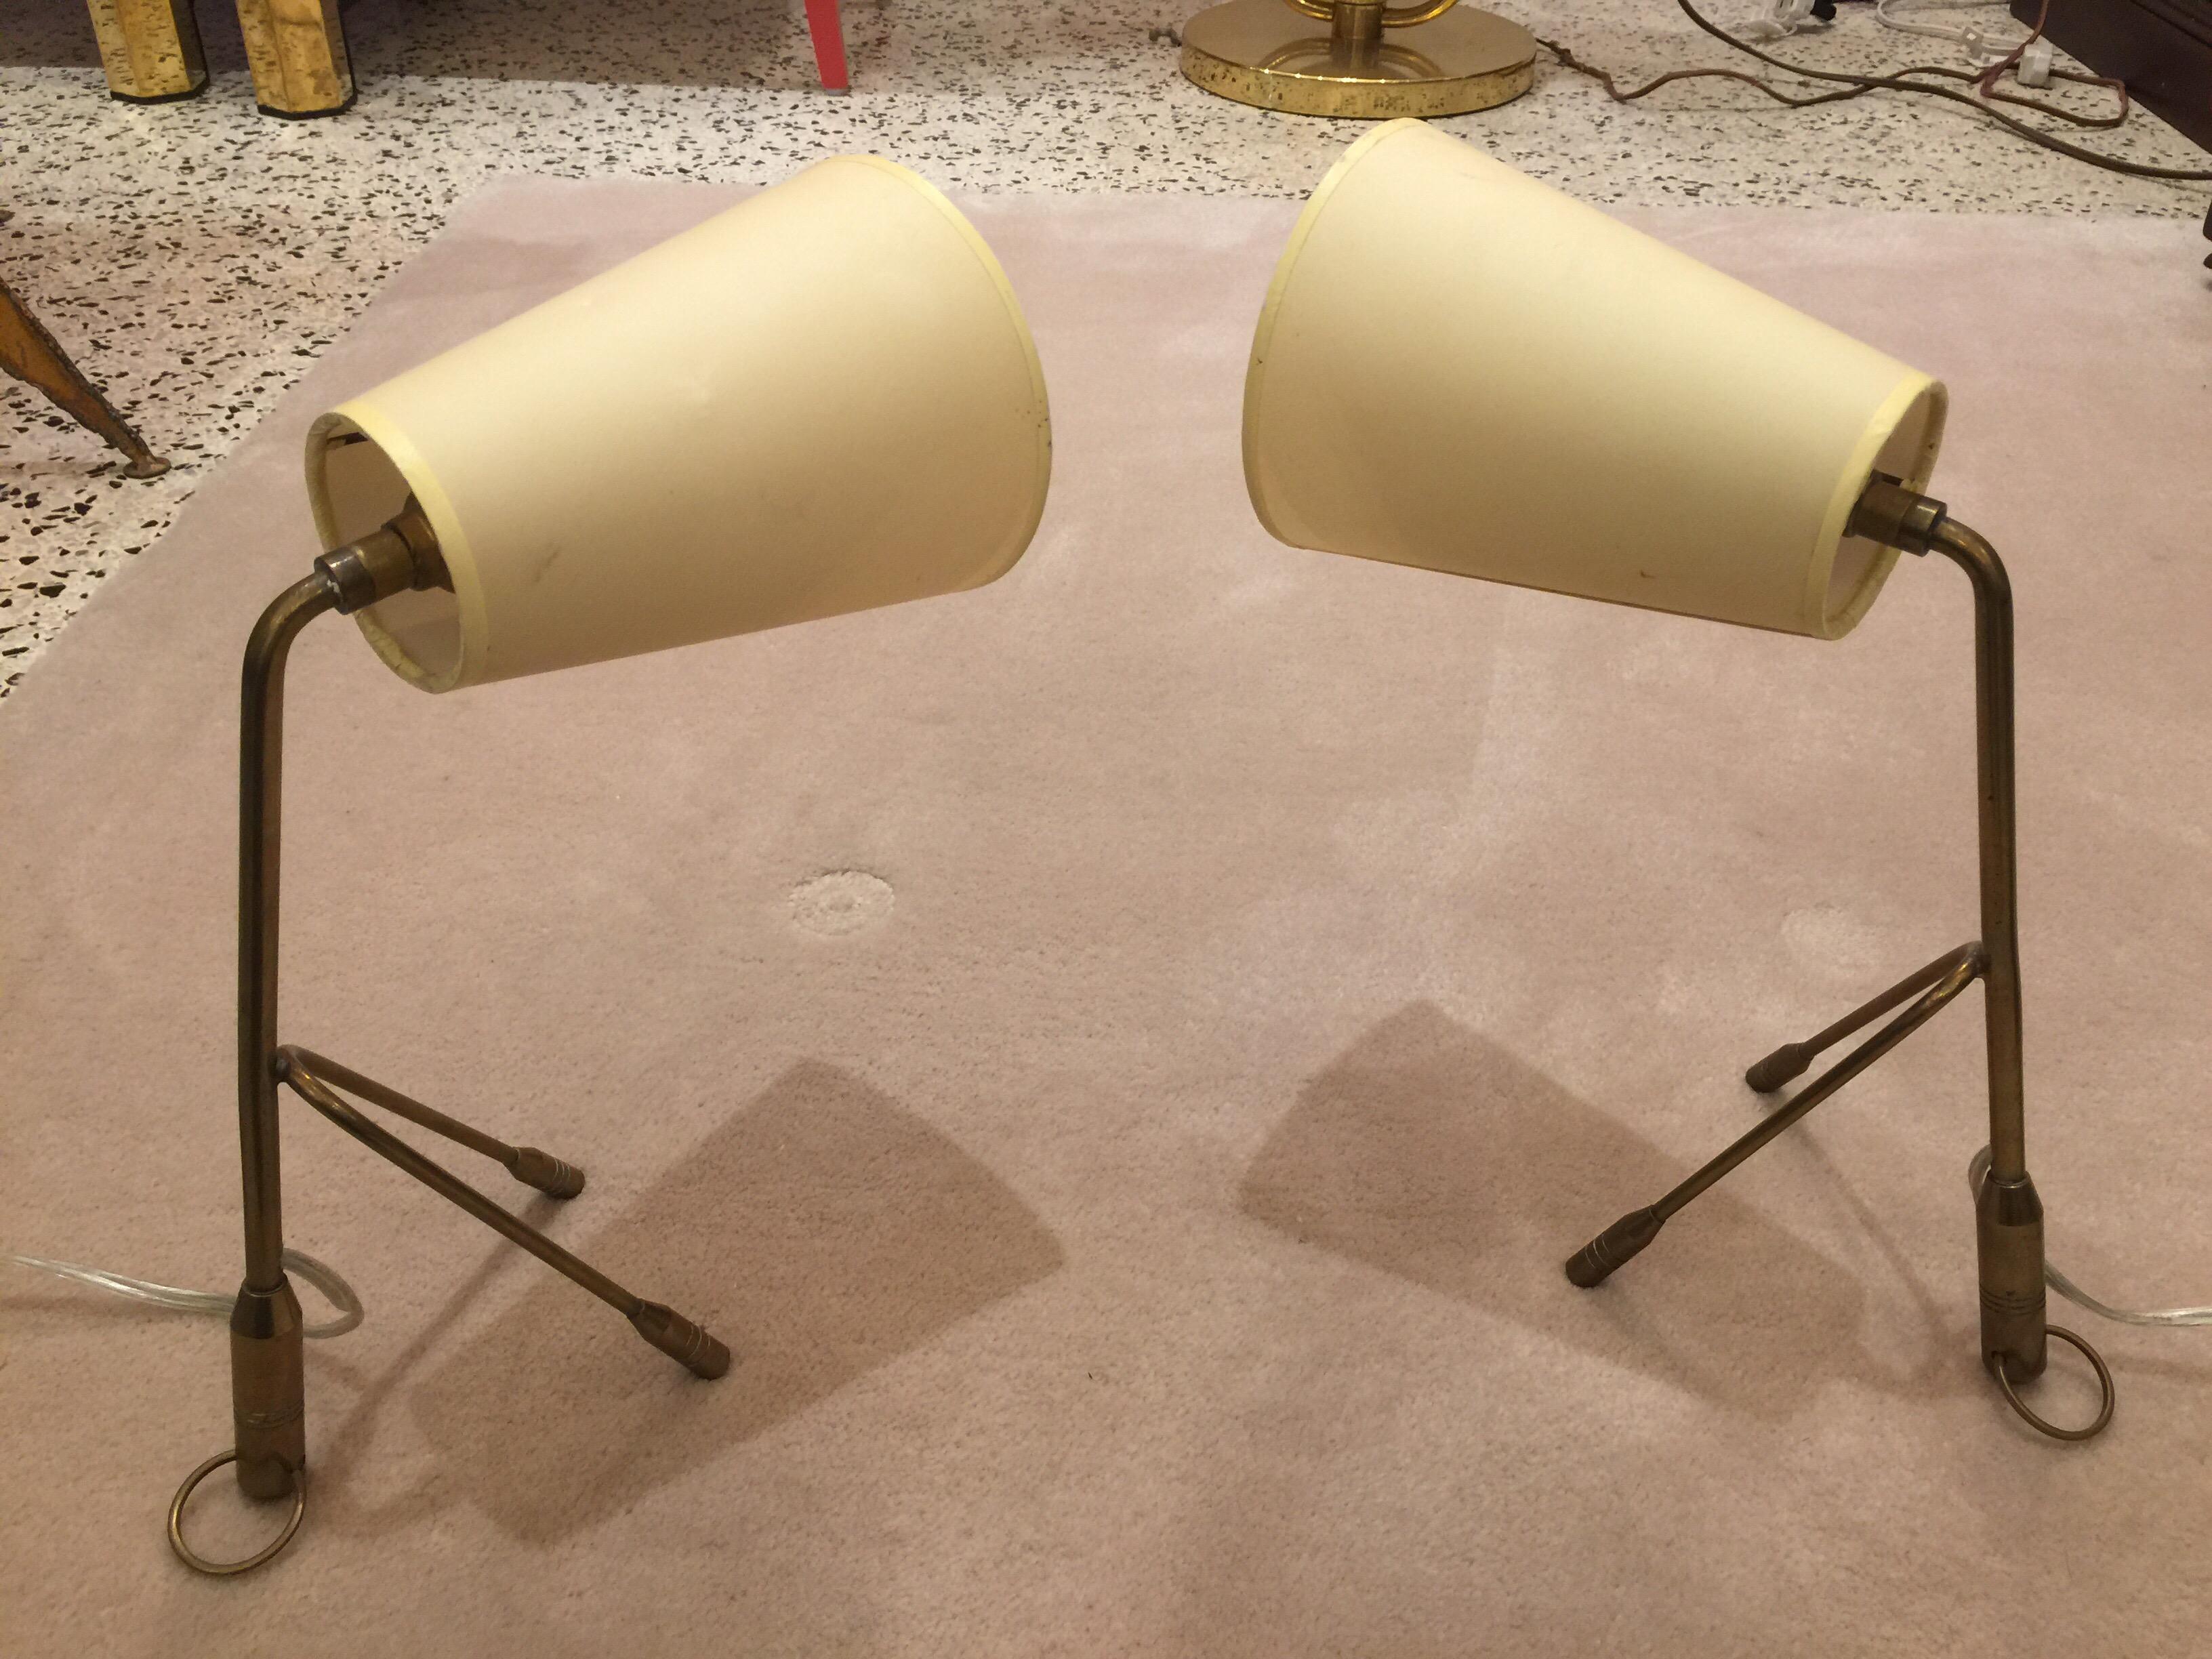 Boris Lacroix pair of wonderful vintage and original brass tri-pod table lamps, circa 1950. The small rings can also be used to hang these beauties on the wall as sconces.